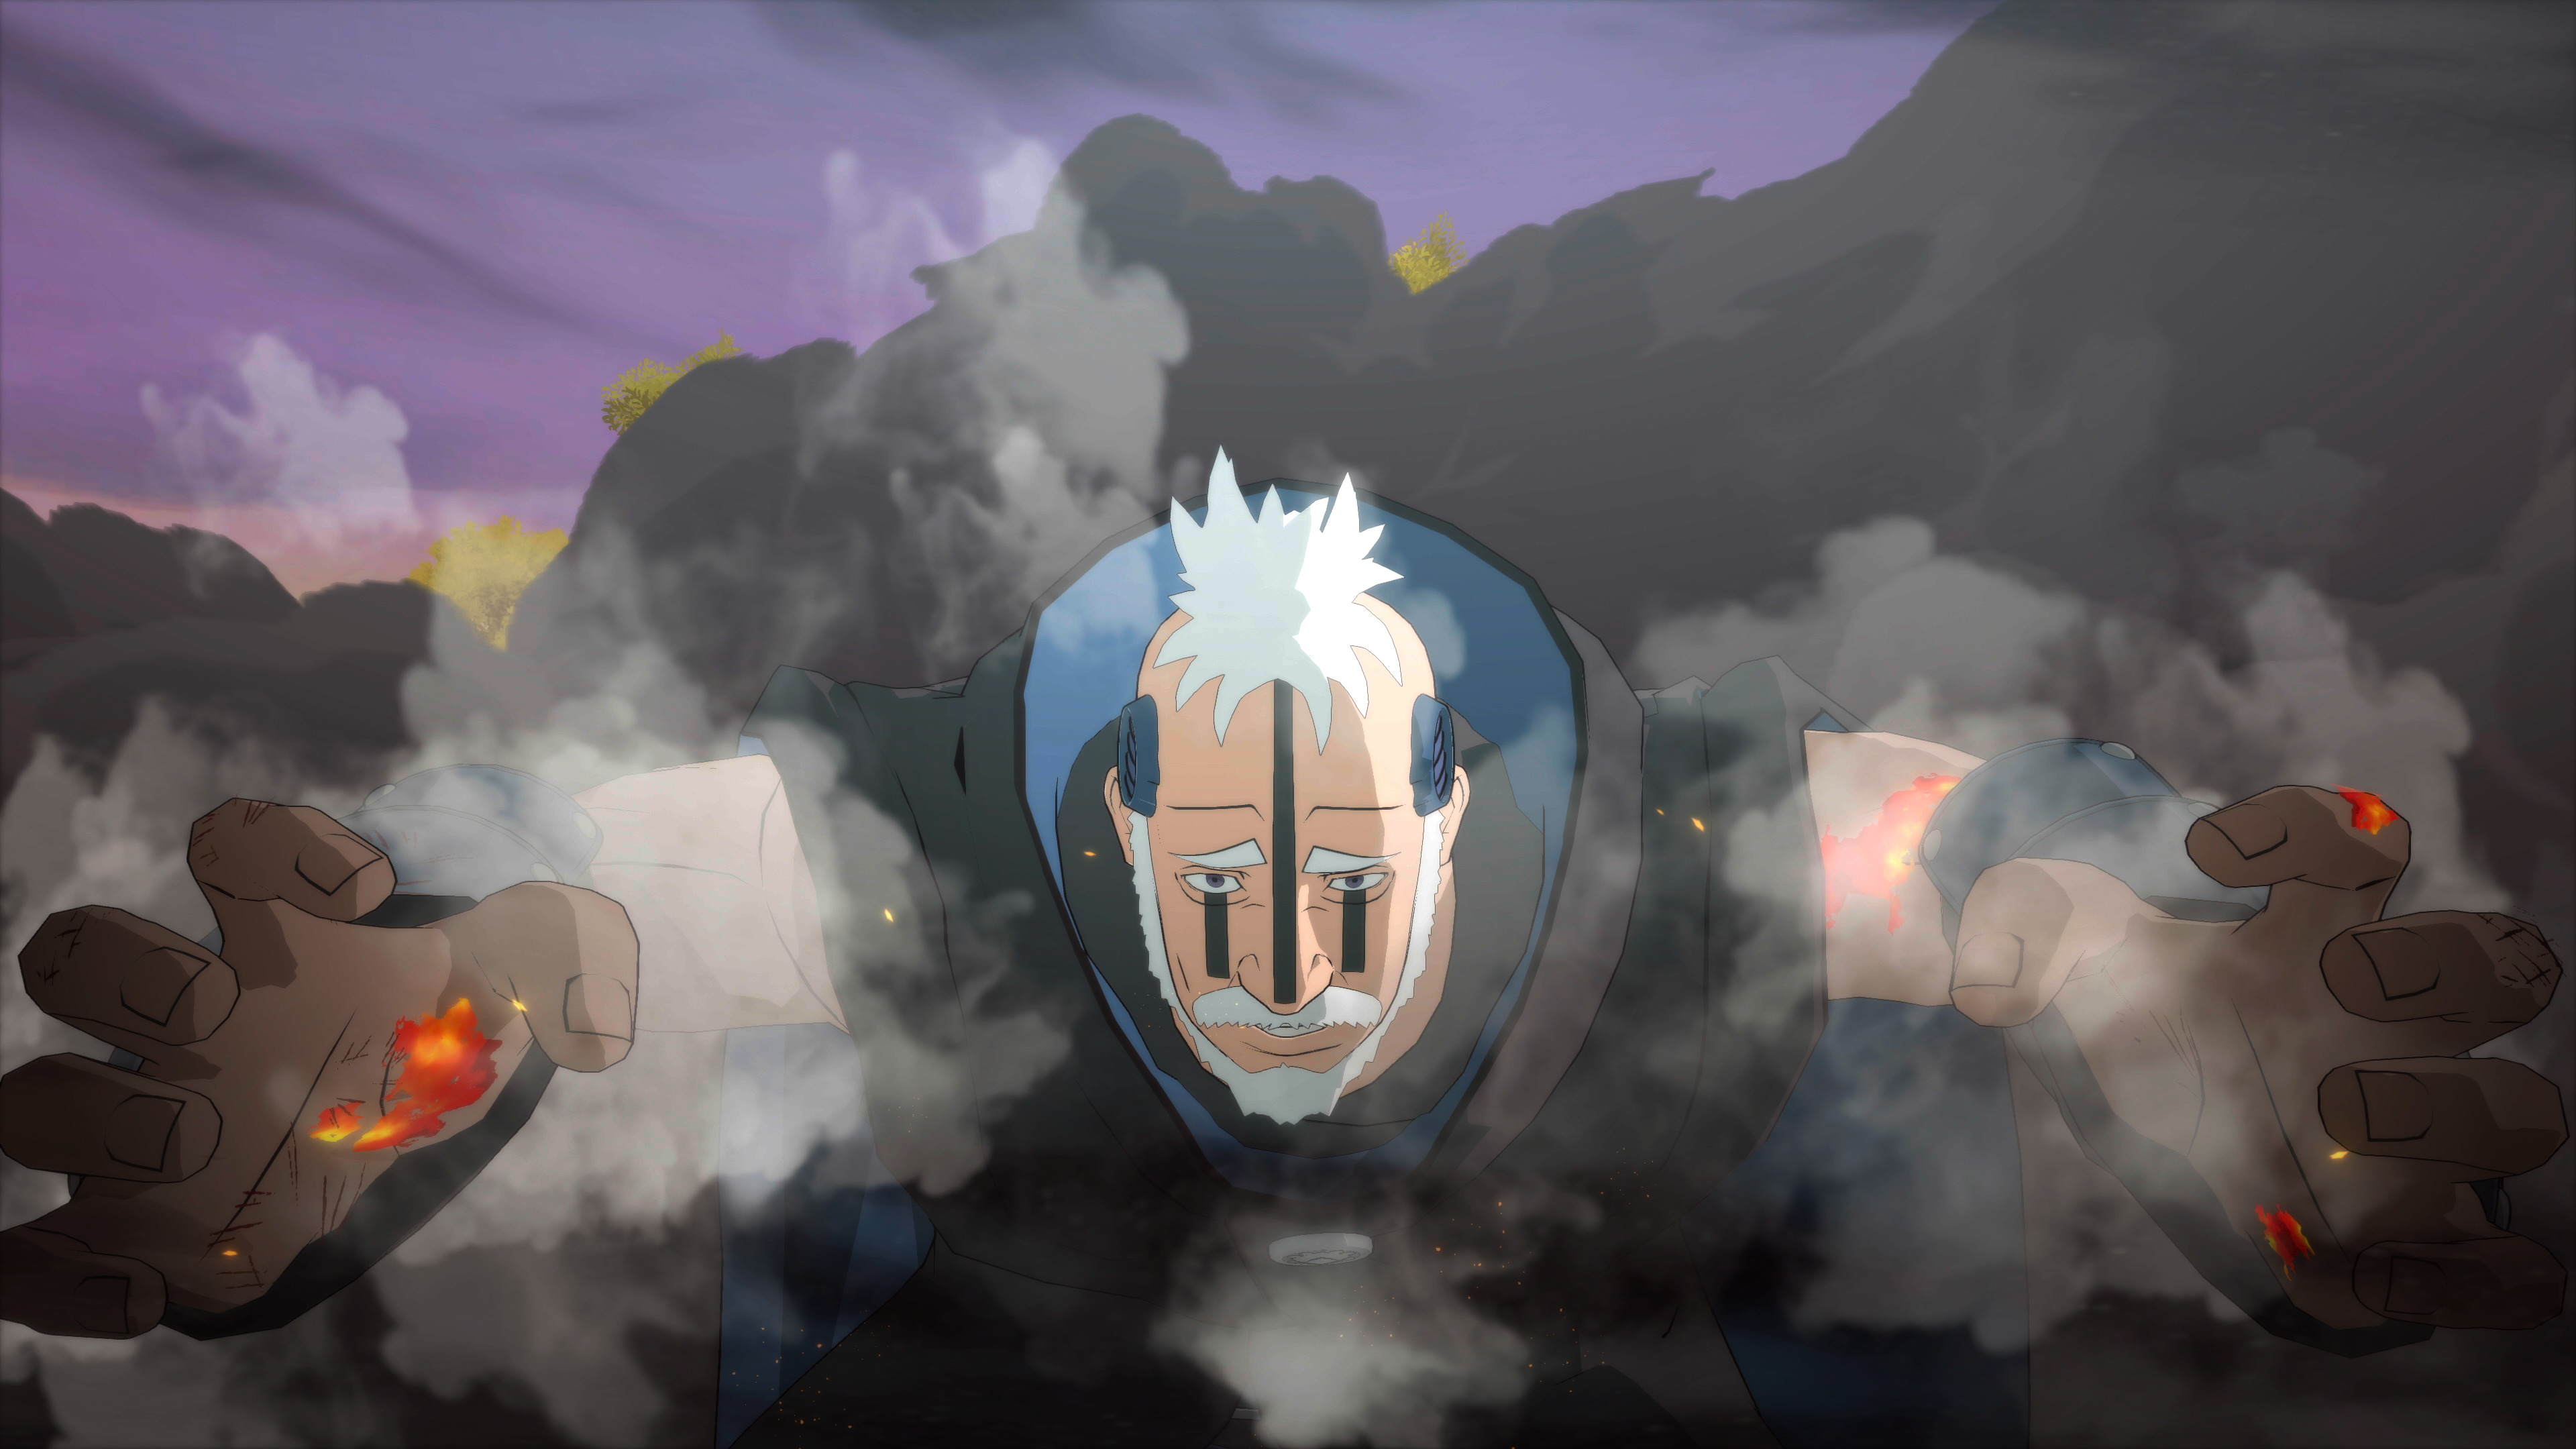 Customize Your Favorite Ninja in Naruto X Boruto Ultimate Ninja Storm  Connections, Out November 17 - Xbox Wire